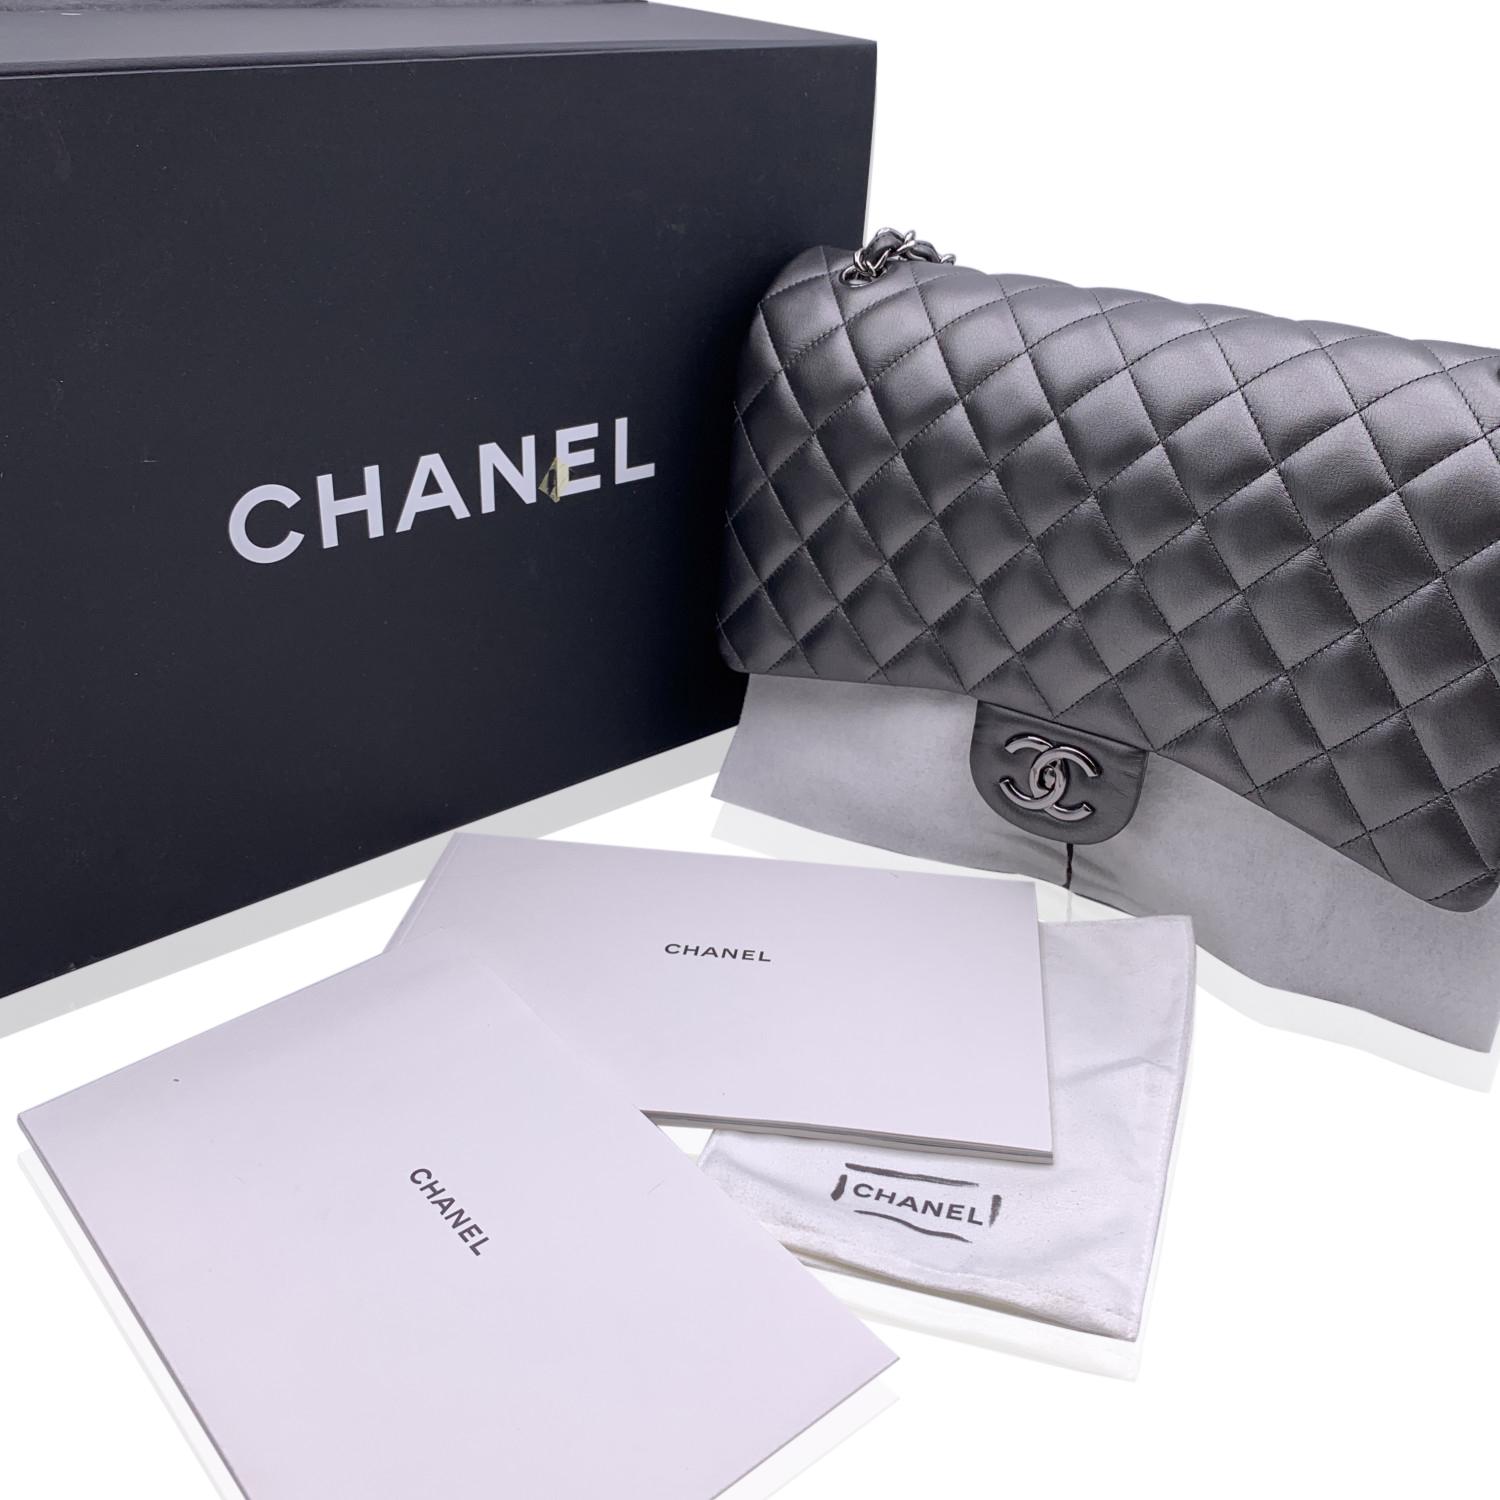 Chanel 'Maxi' Classic Quilted Double Flap Bag. Grey metallic quilted leather. Silver metal hardware. Period/Era: 2013/2014. It features double 'CC' turn lock closure and double flap interior. Interwoven chain/leather strap; can be worn on the